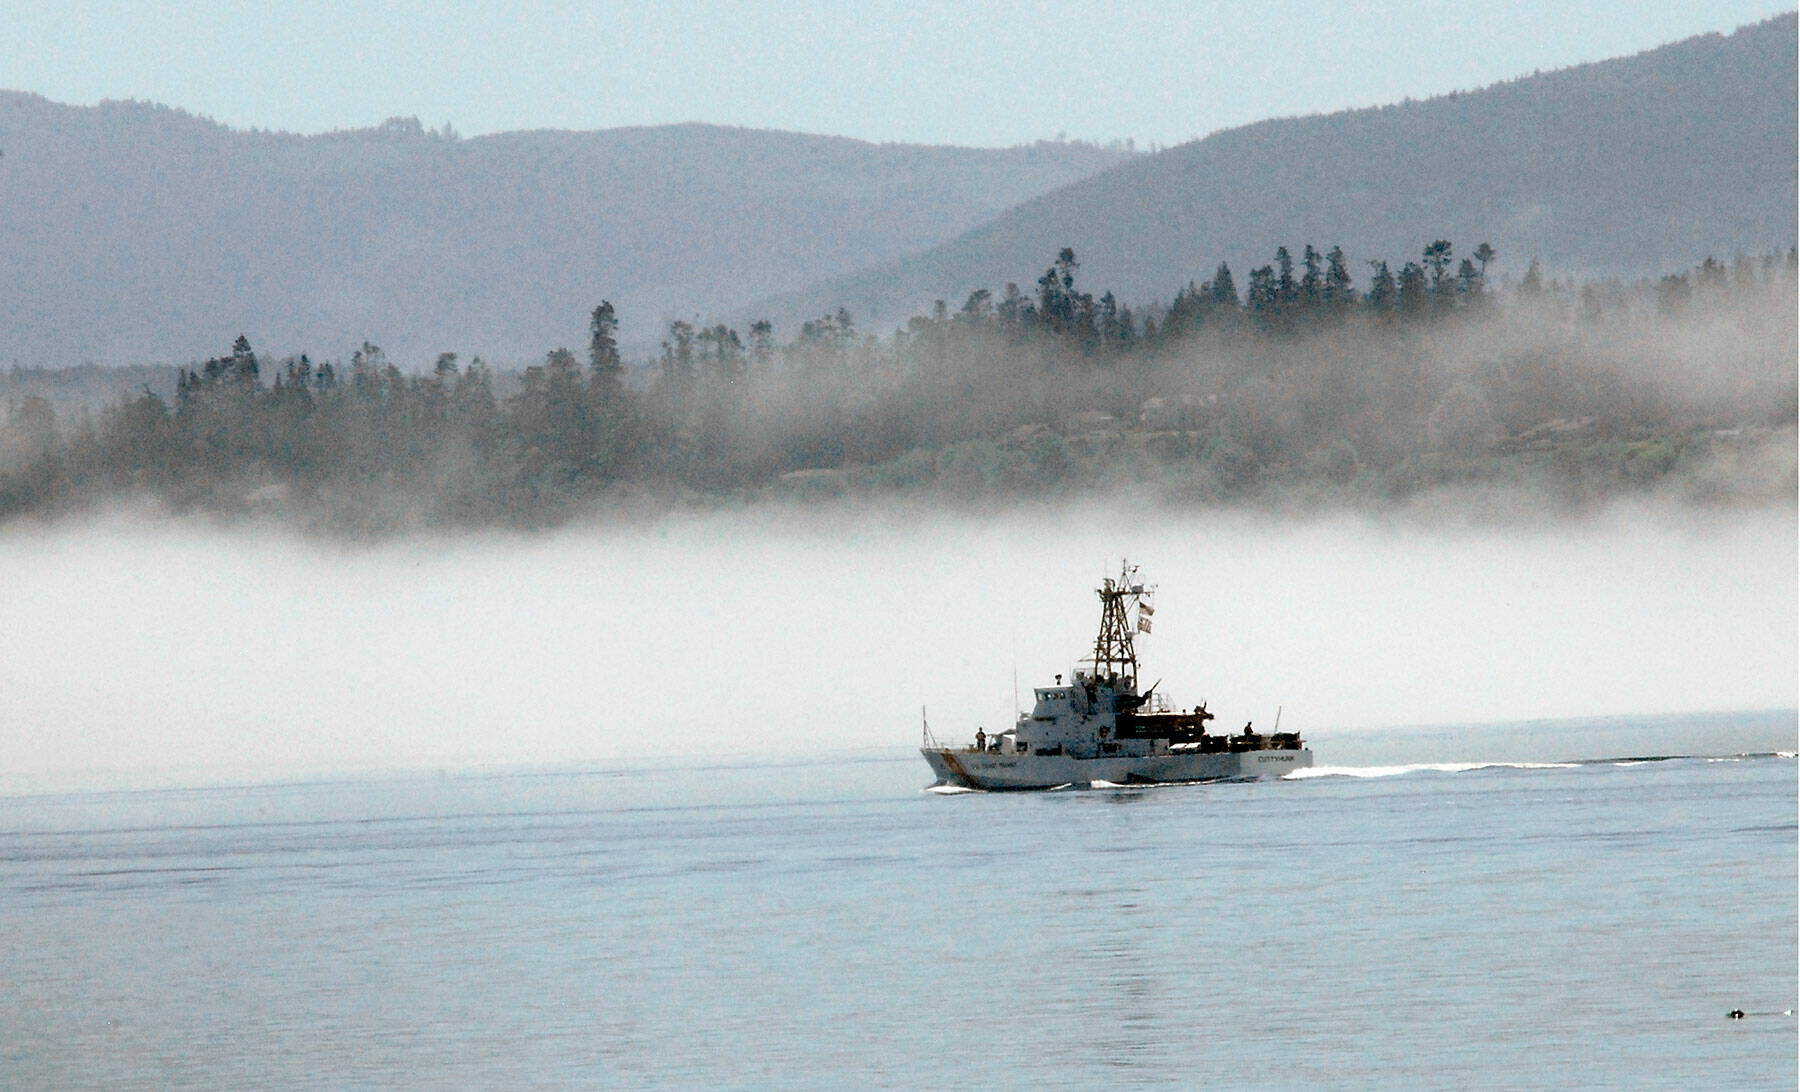 The U.S. Coast Guard cutter Cuttyhunk sails across Port Angeles Harbor against a backdrop of fog hugging the shoreline. in June 2020. (Keith Thorpe/Peninsula Daily News)